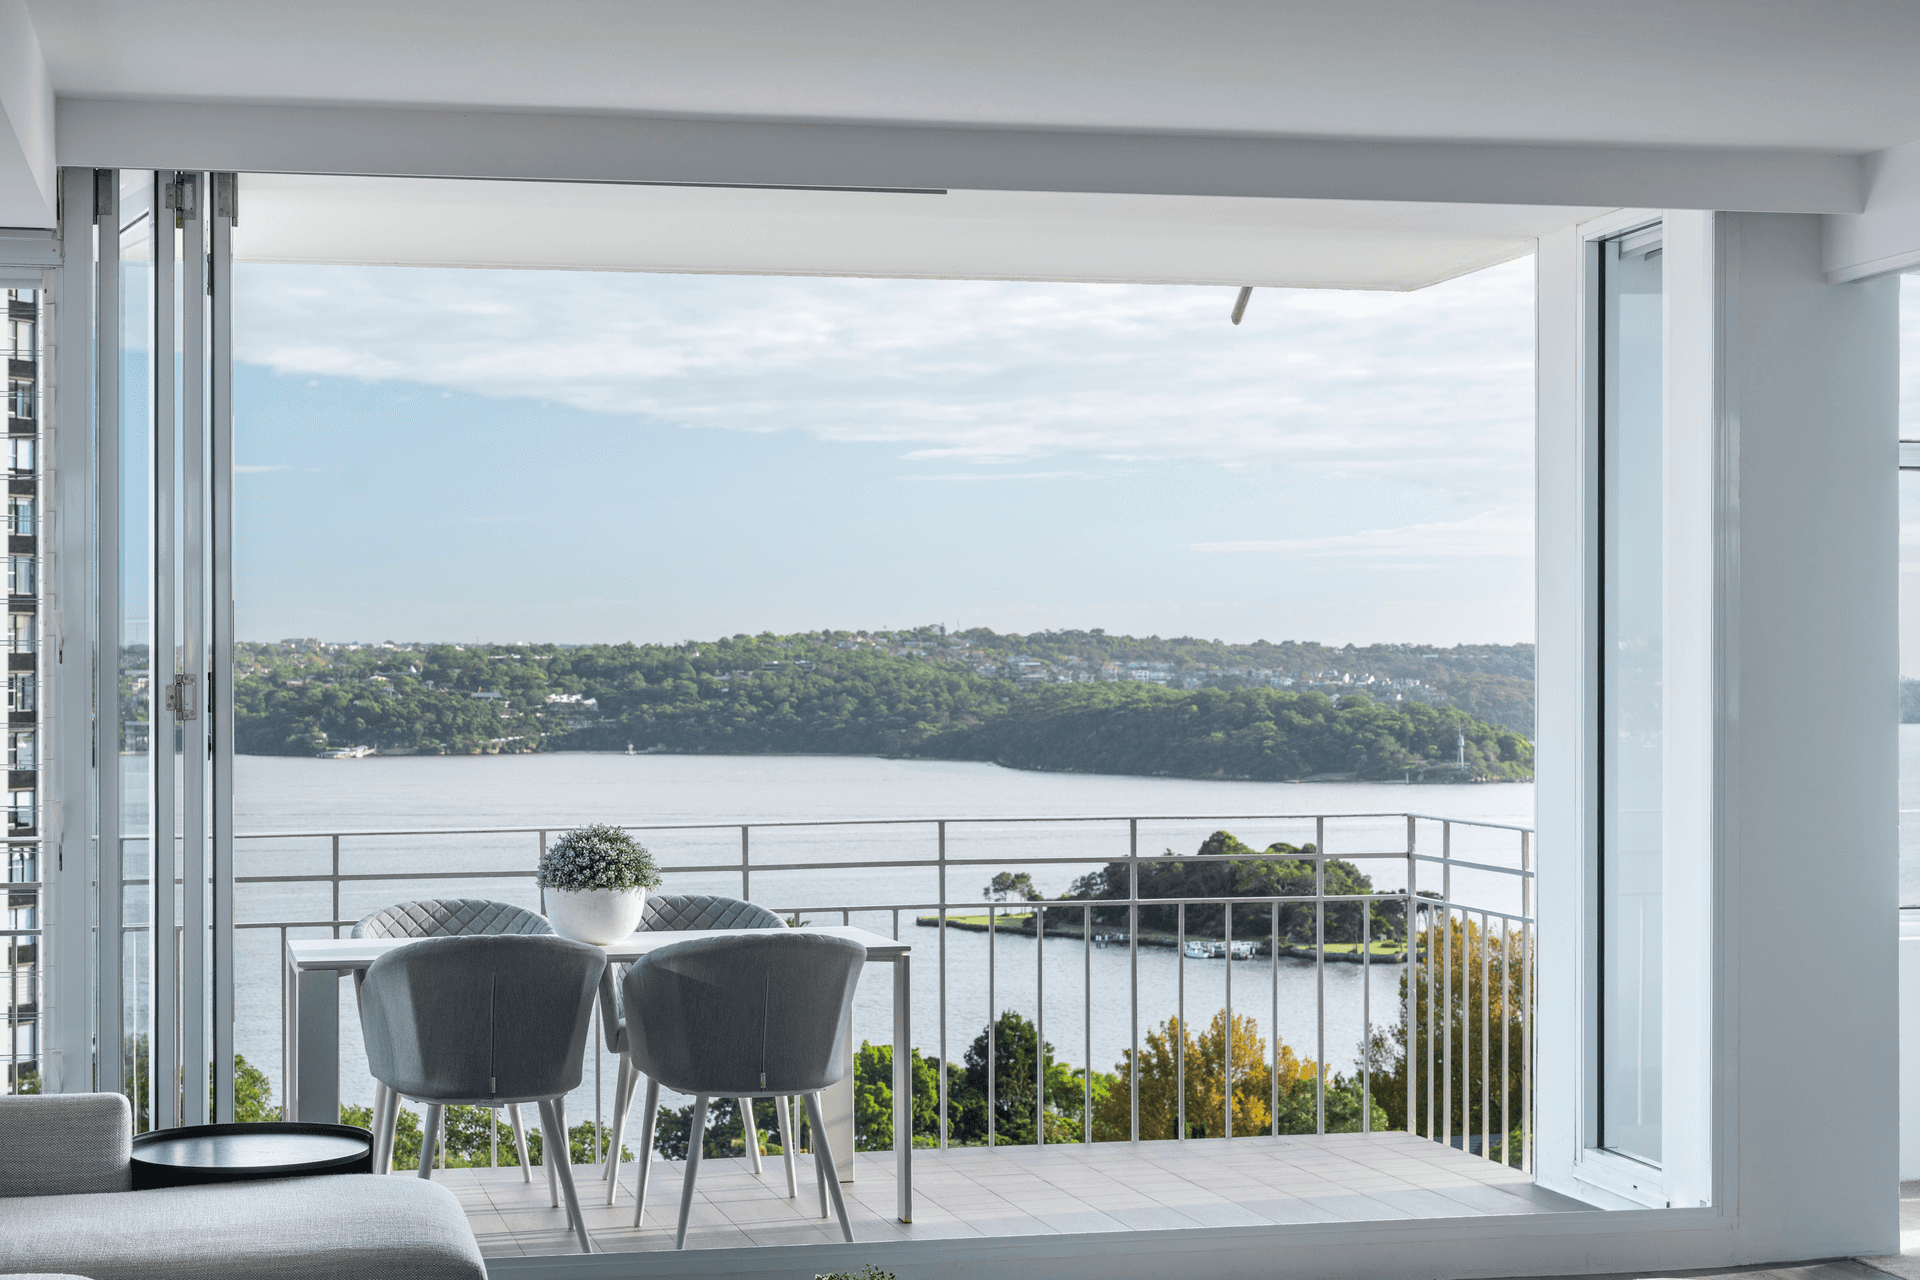 94/66-66A Darling Point Road, Darling Point, NSW 2027